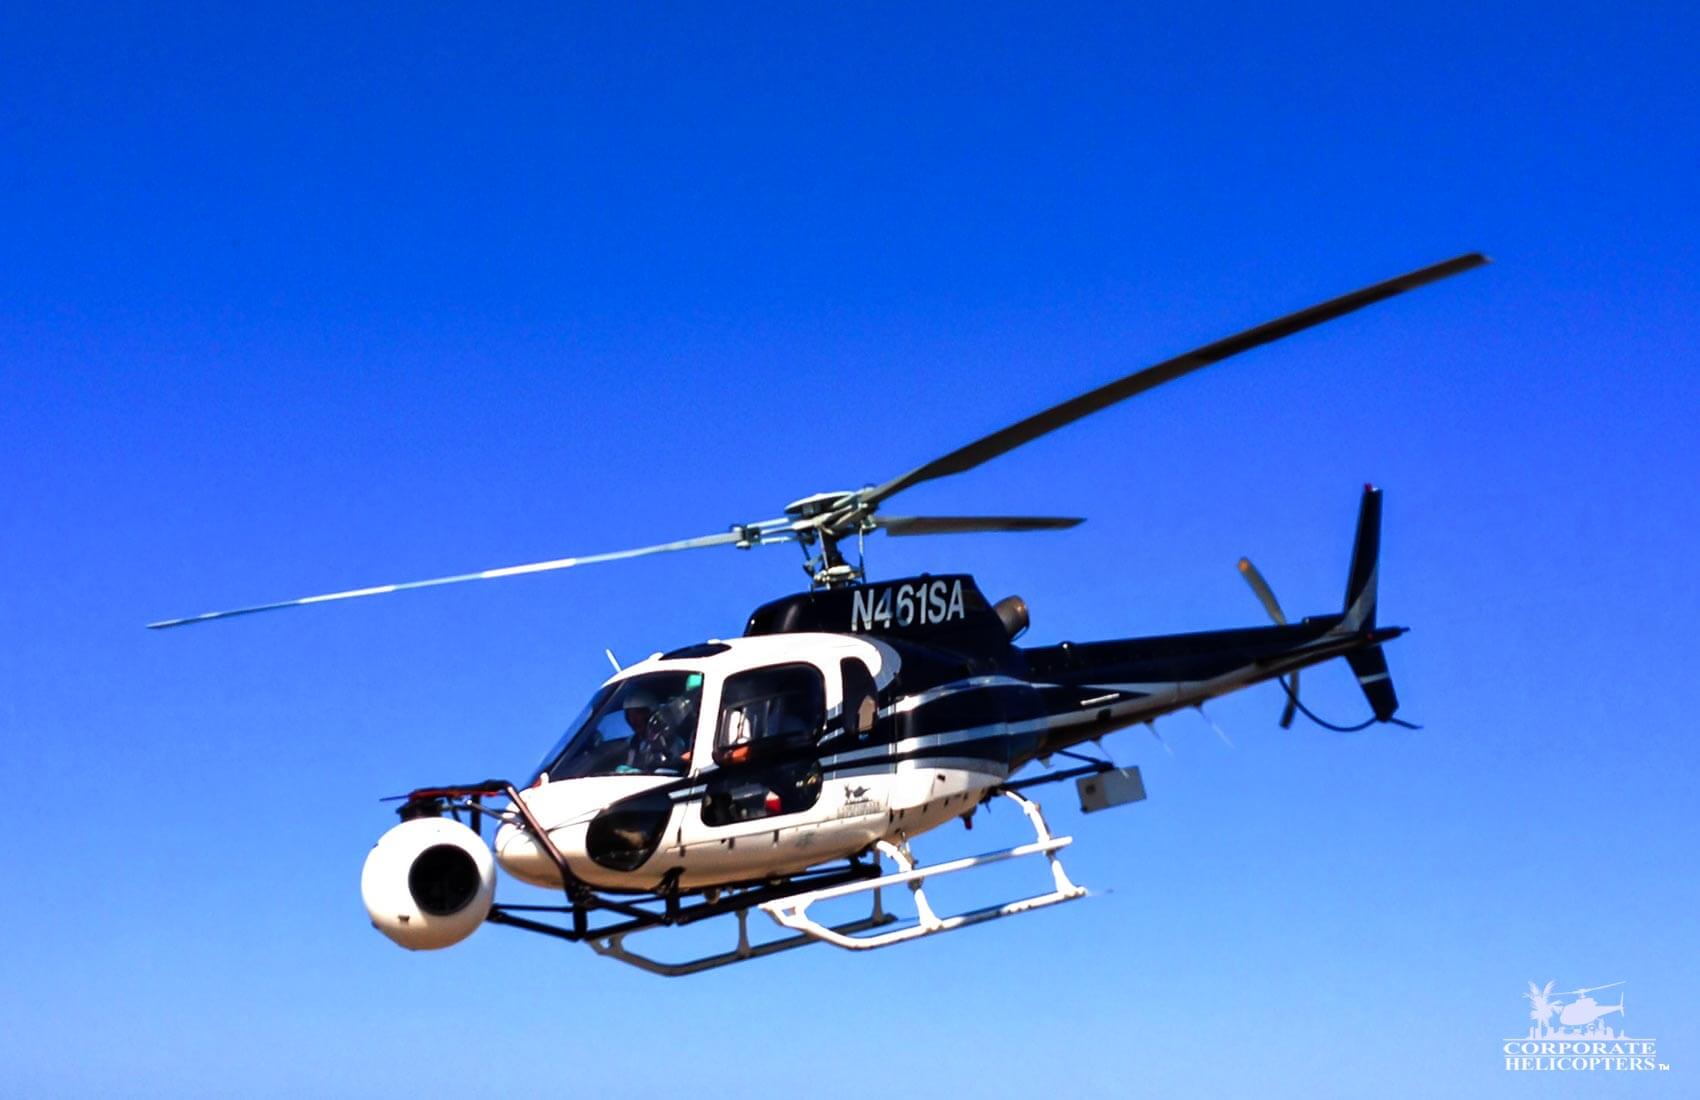 Corporate Helicopters: Tours, Charters, Filming, Sales - San Diego, CA